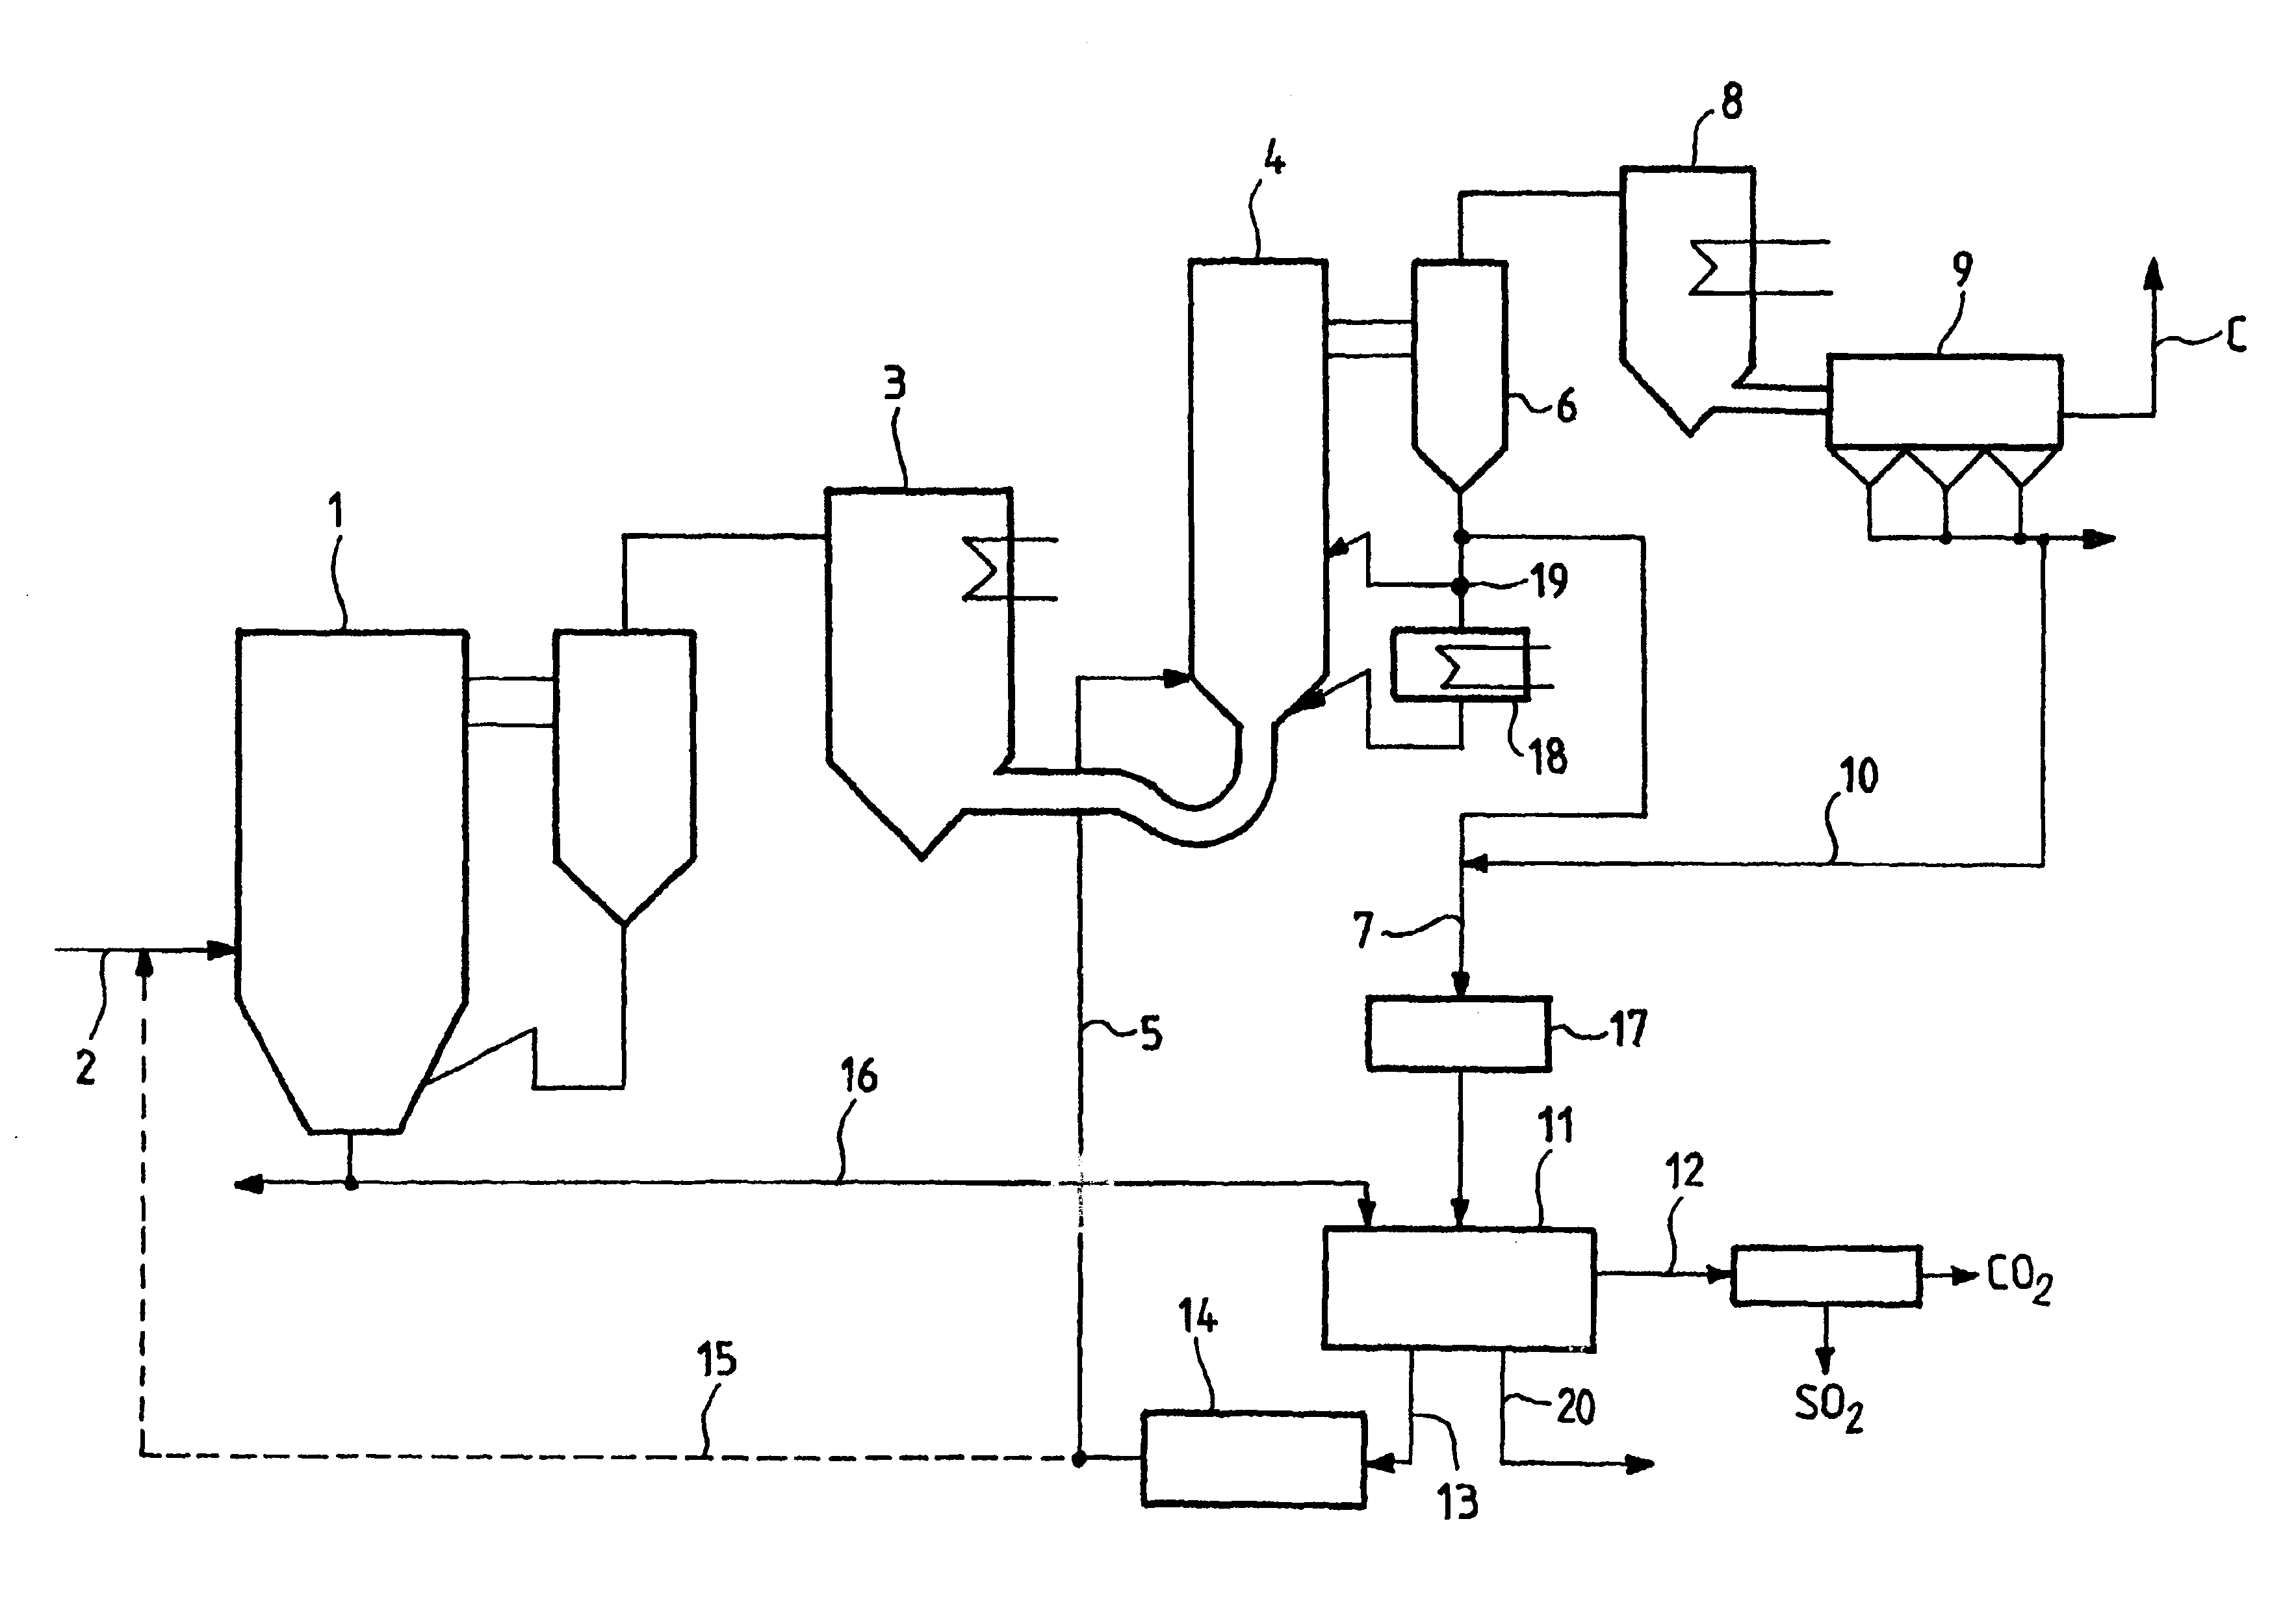 Method of simultaneously reducing CO2 and SO2 emissions in a combustion installation